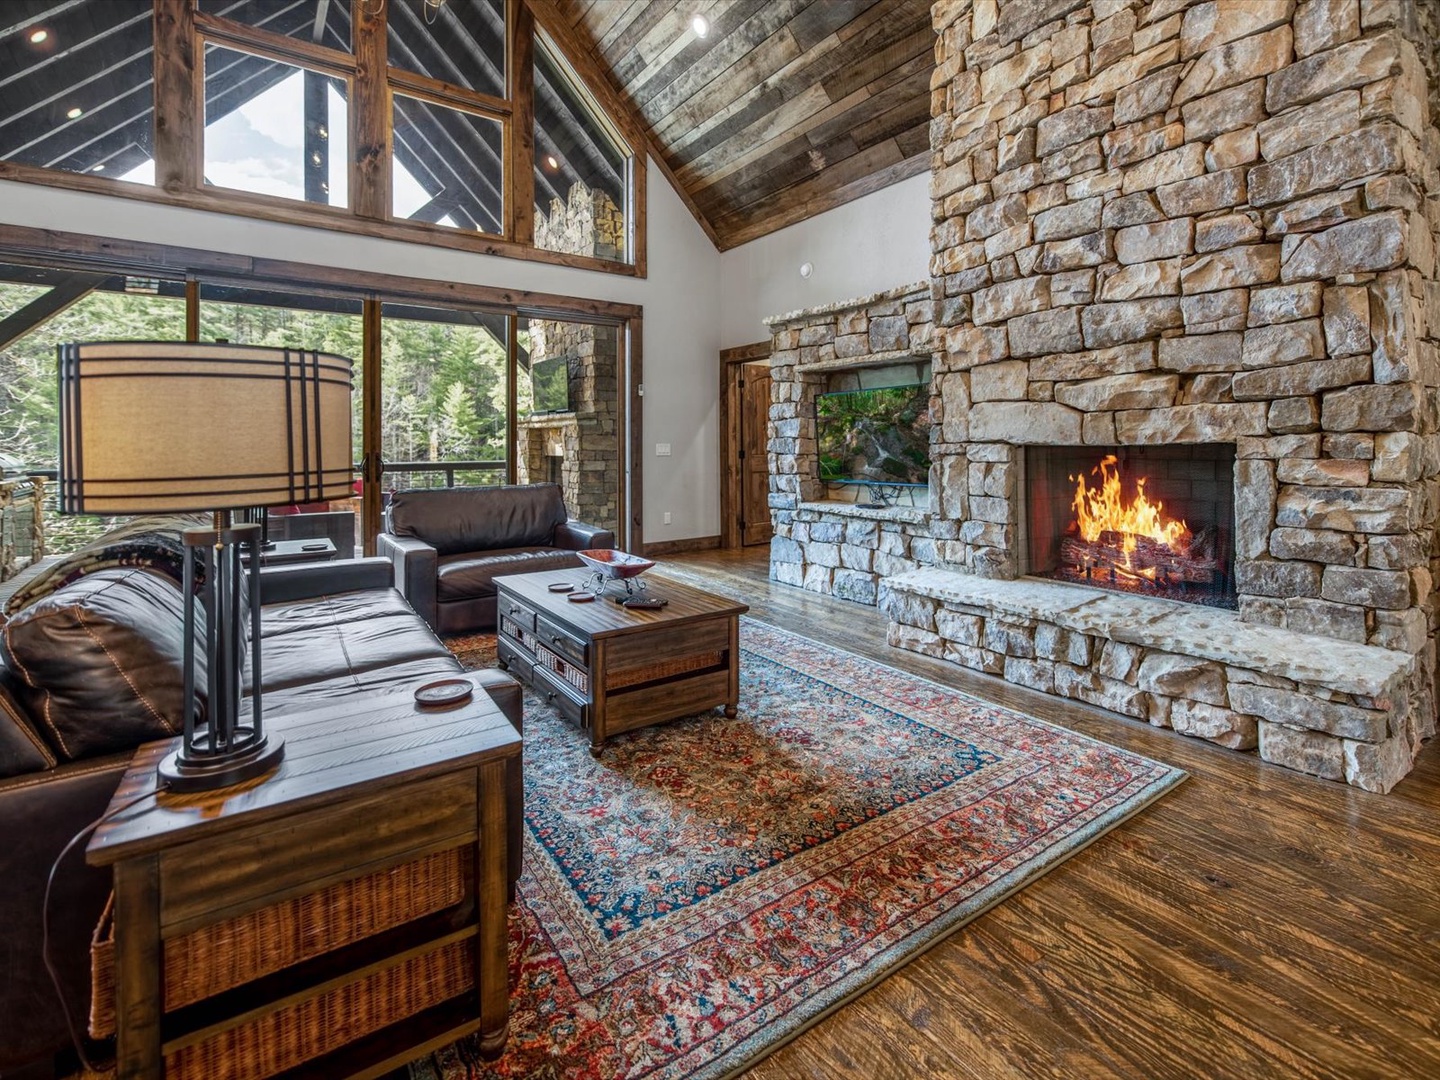 Misty Trail Lakehouse - Living Room with Gas Fireplace